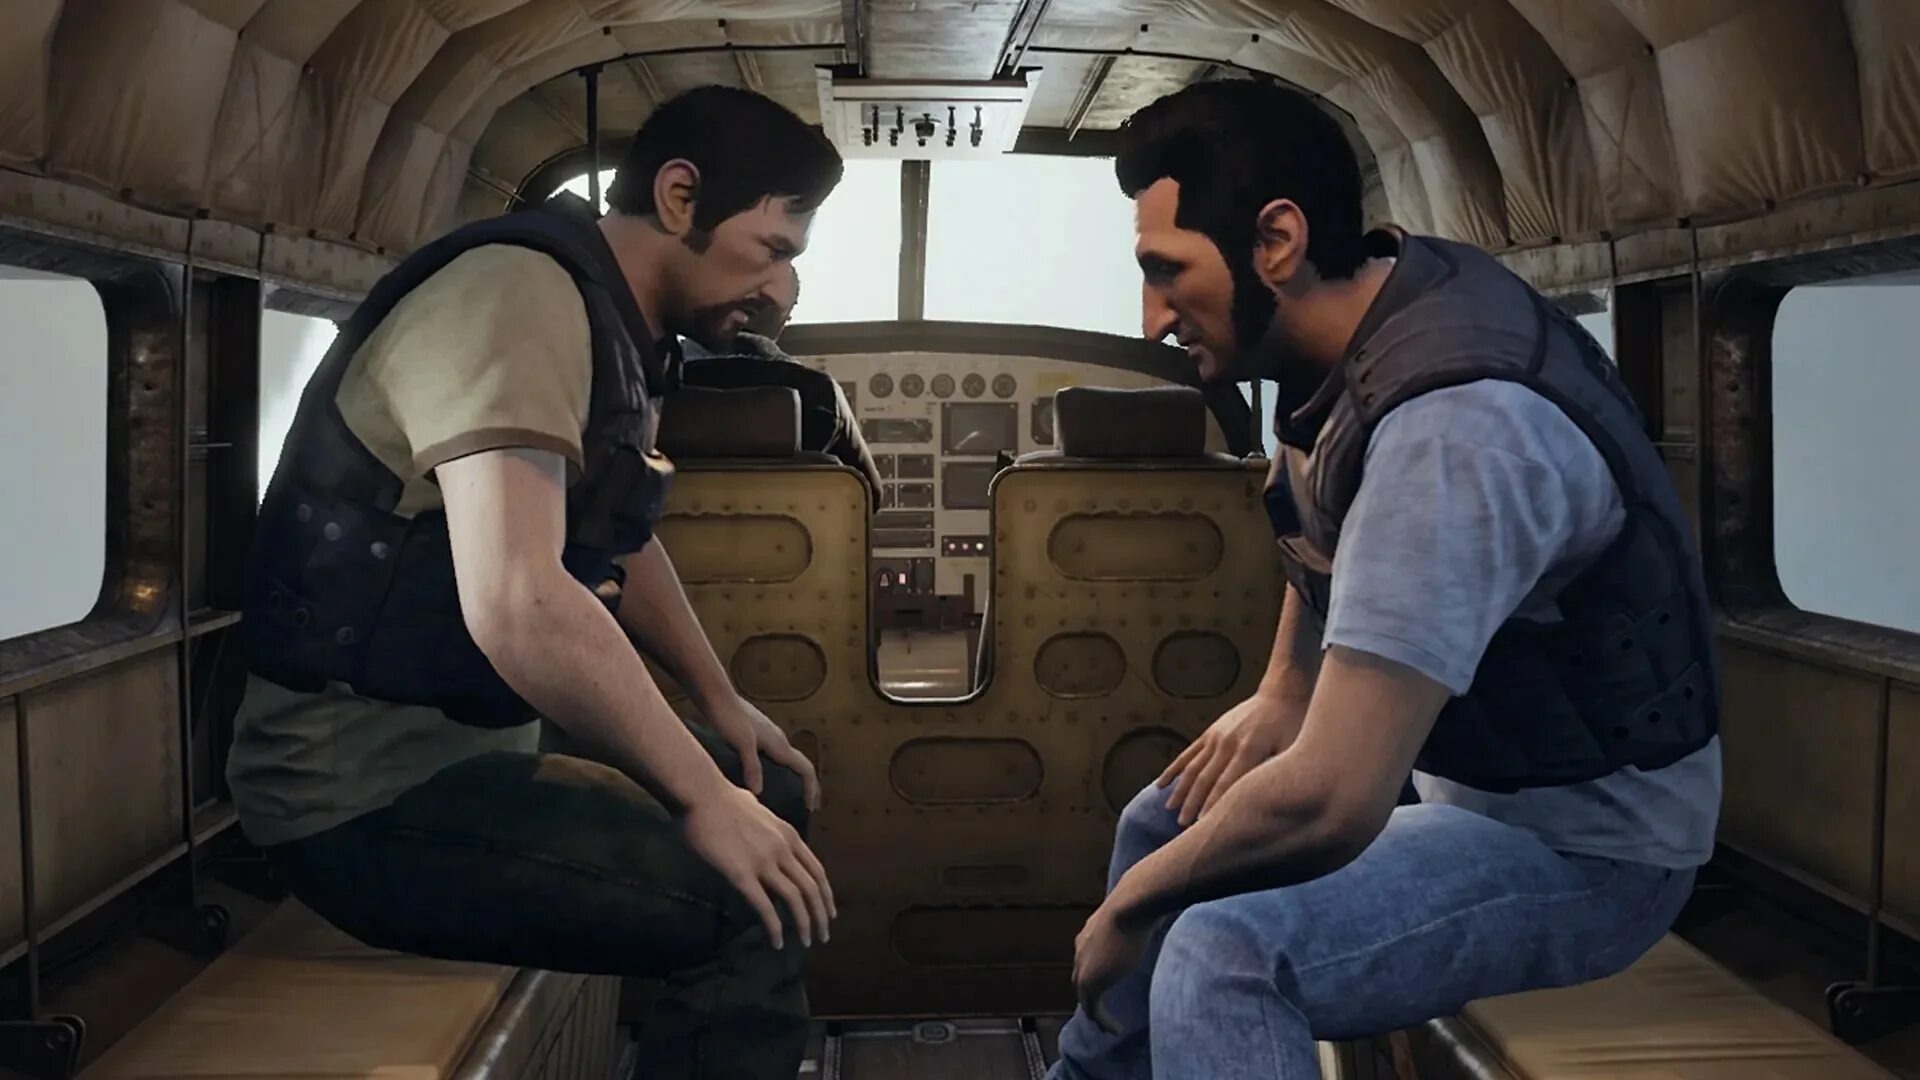 A way out game. Вэй аут. Way out игра. А Wаy оut игра. Игра побег из тюрьмы a way out.